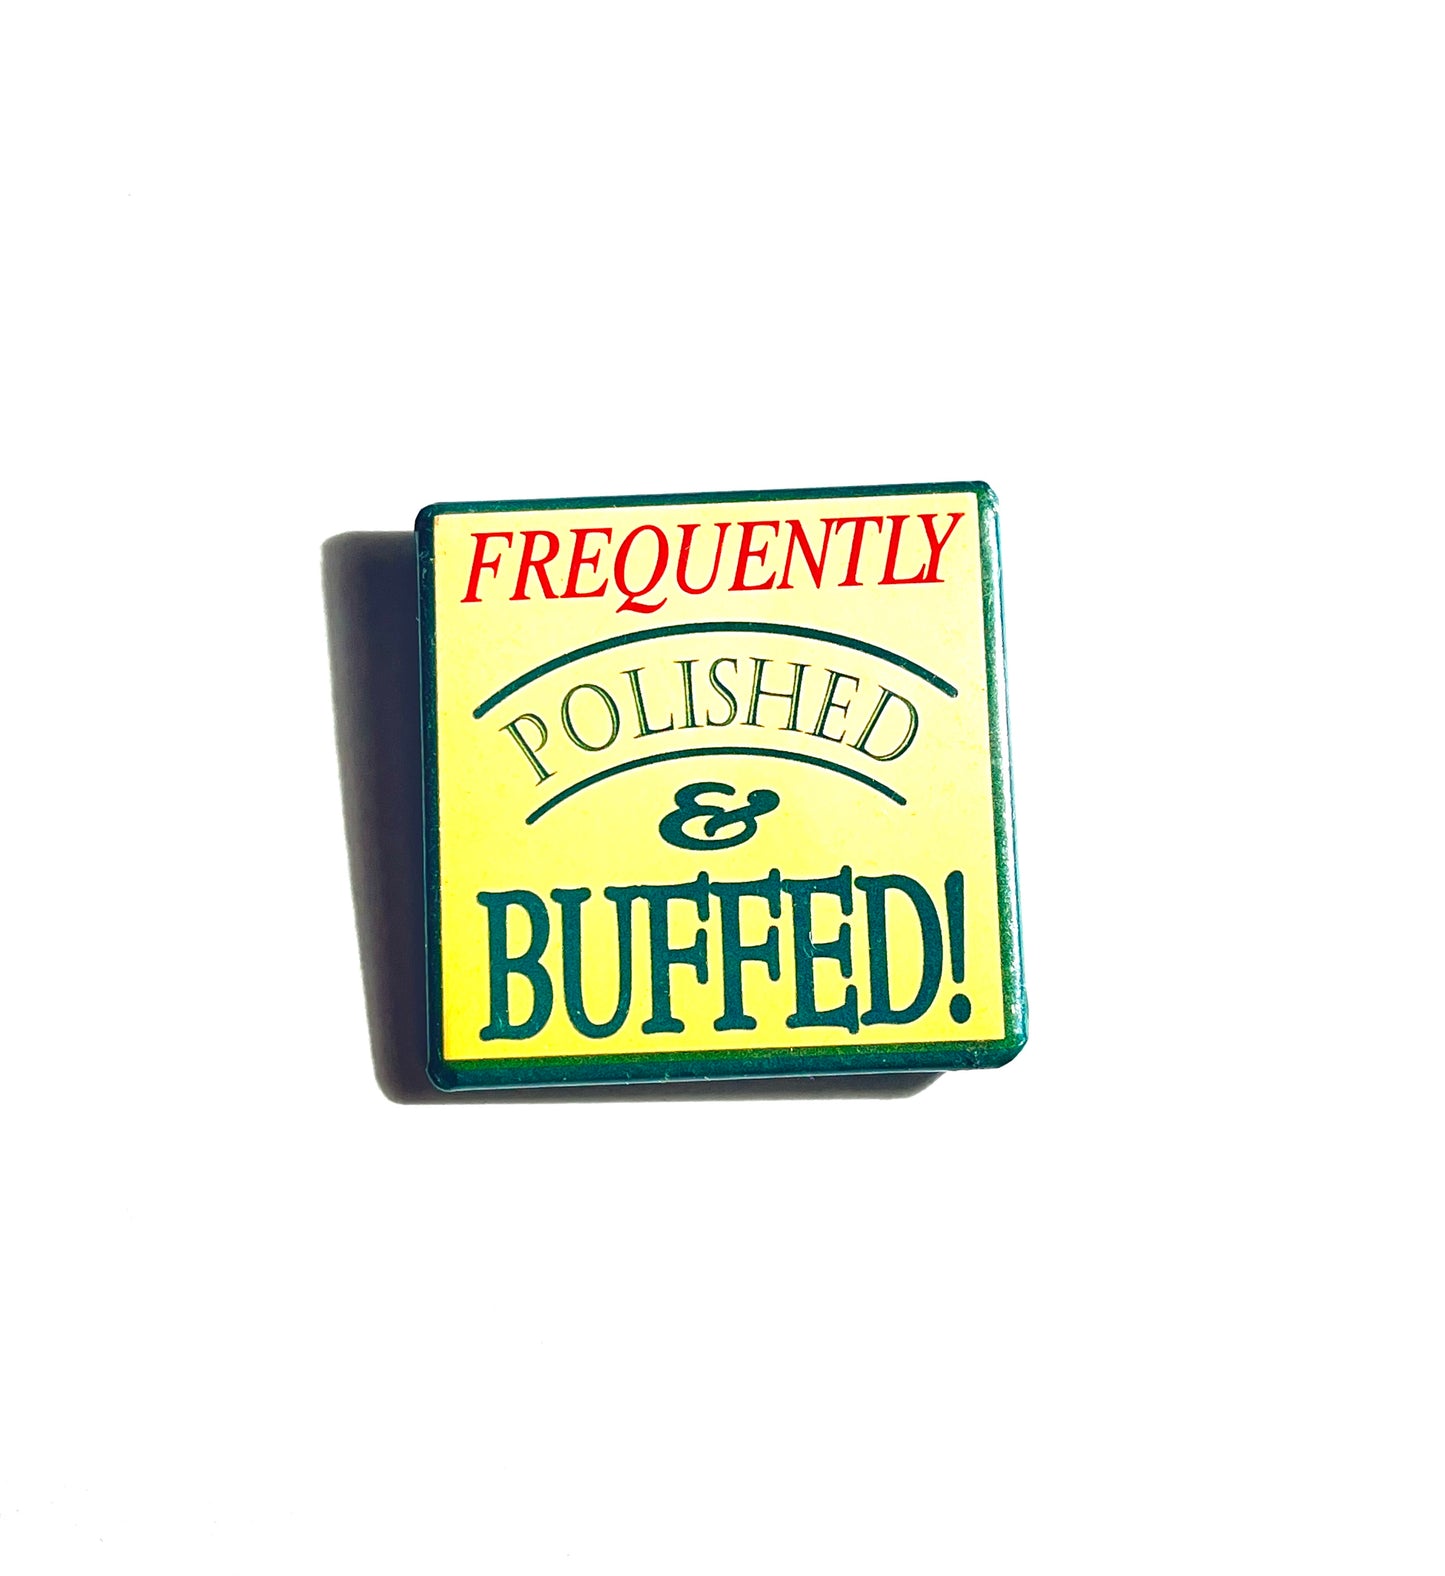 Vintage Frequently Polished & Buffed Pin